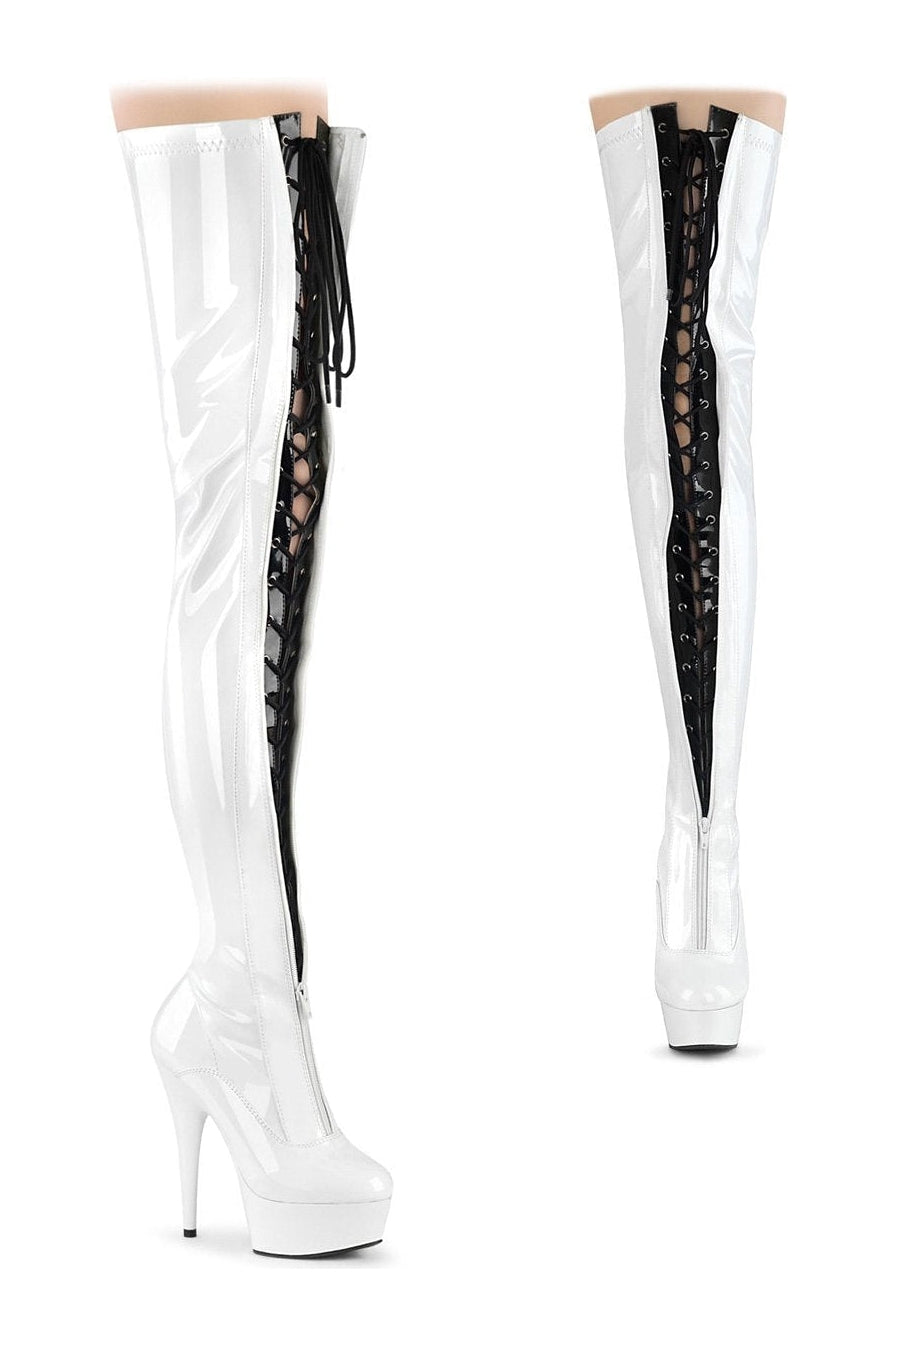 DELIGHT-3027 Thigh Boot | White Patent-Thigh Boots-Pleaser-White-7-Patent-SEXYSHOES.COM